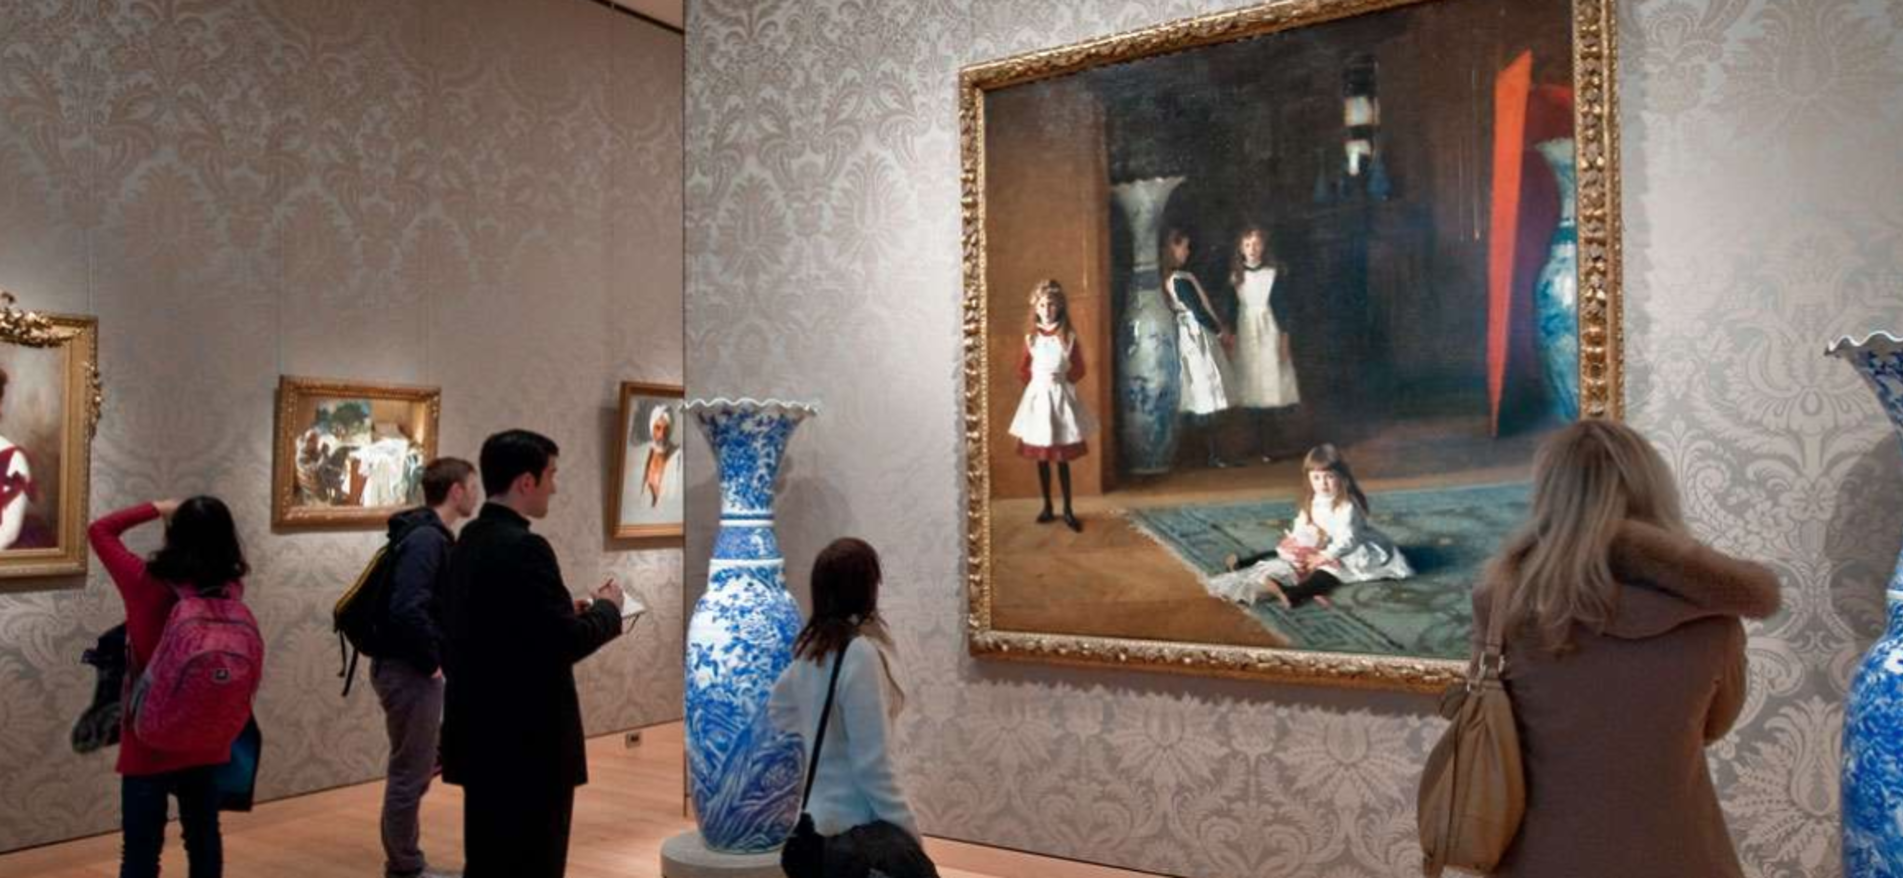 Things To Do In Boston Attractions Tours Nightlife Museums